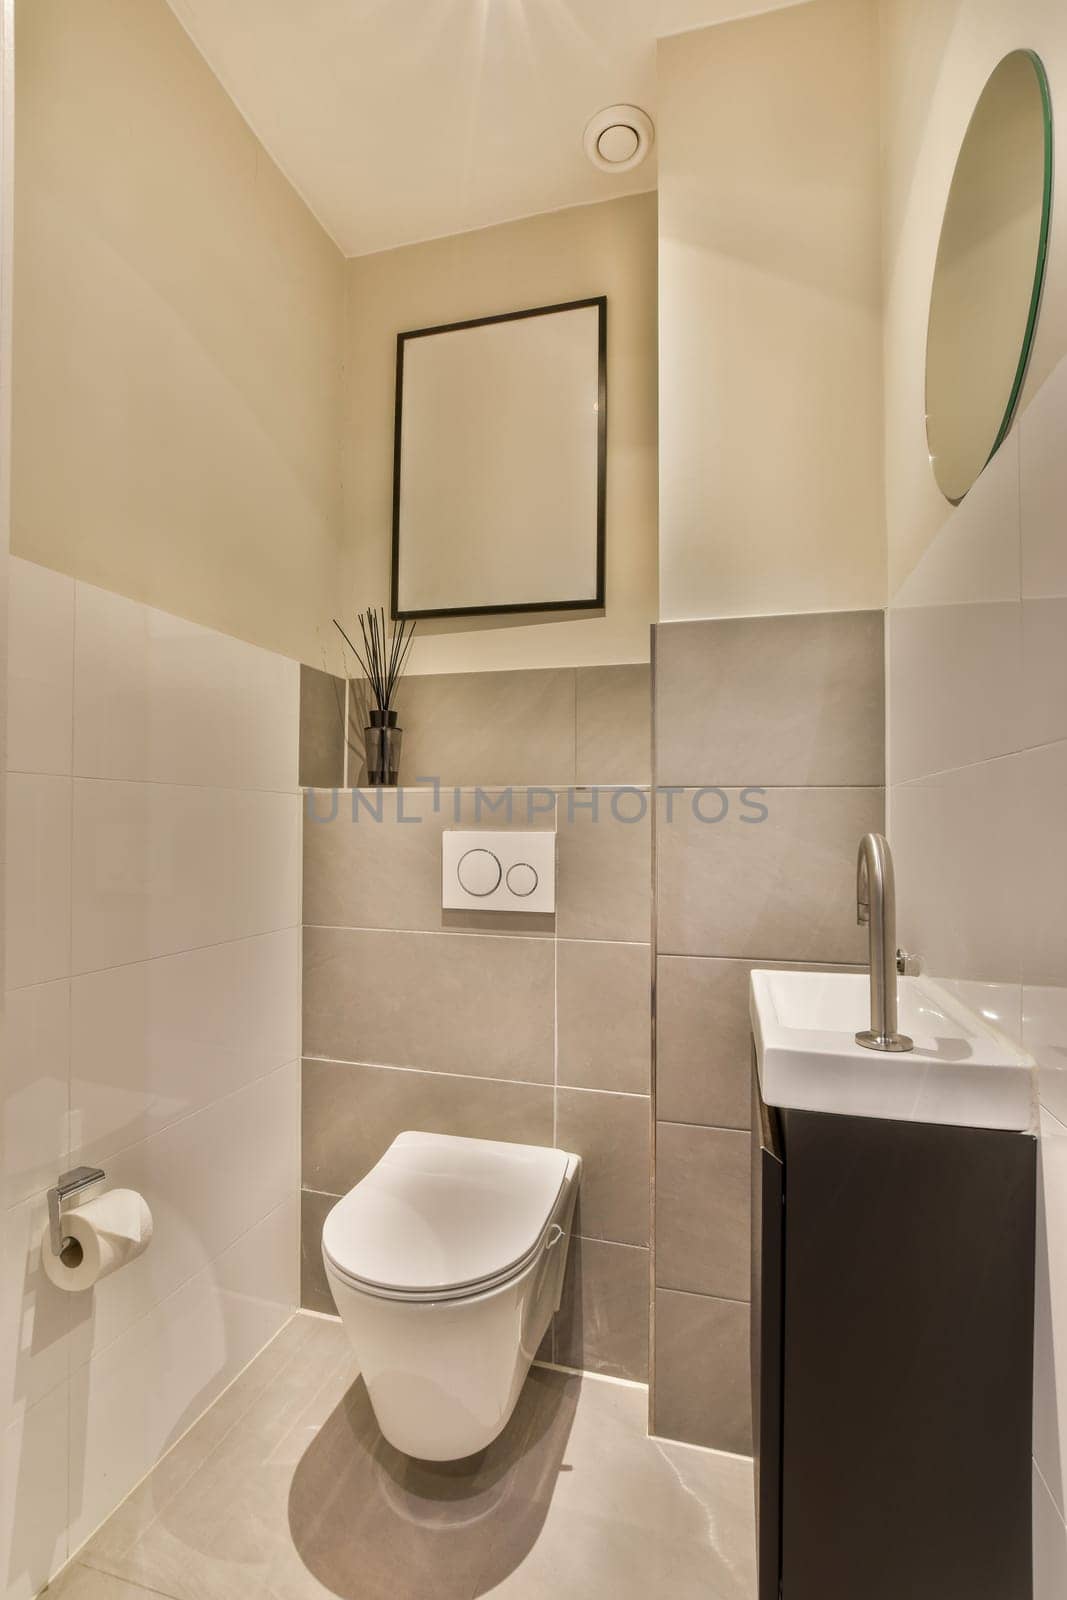 a bathroom with a toilet, sink and mirror on the wall in front of the shower stall is not visible